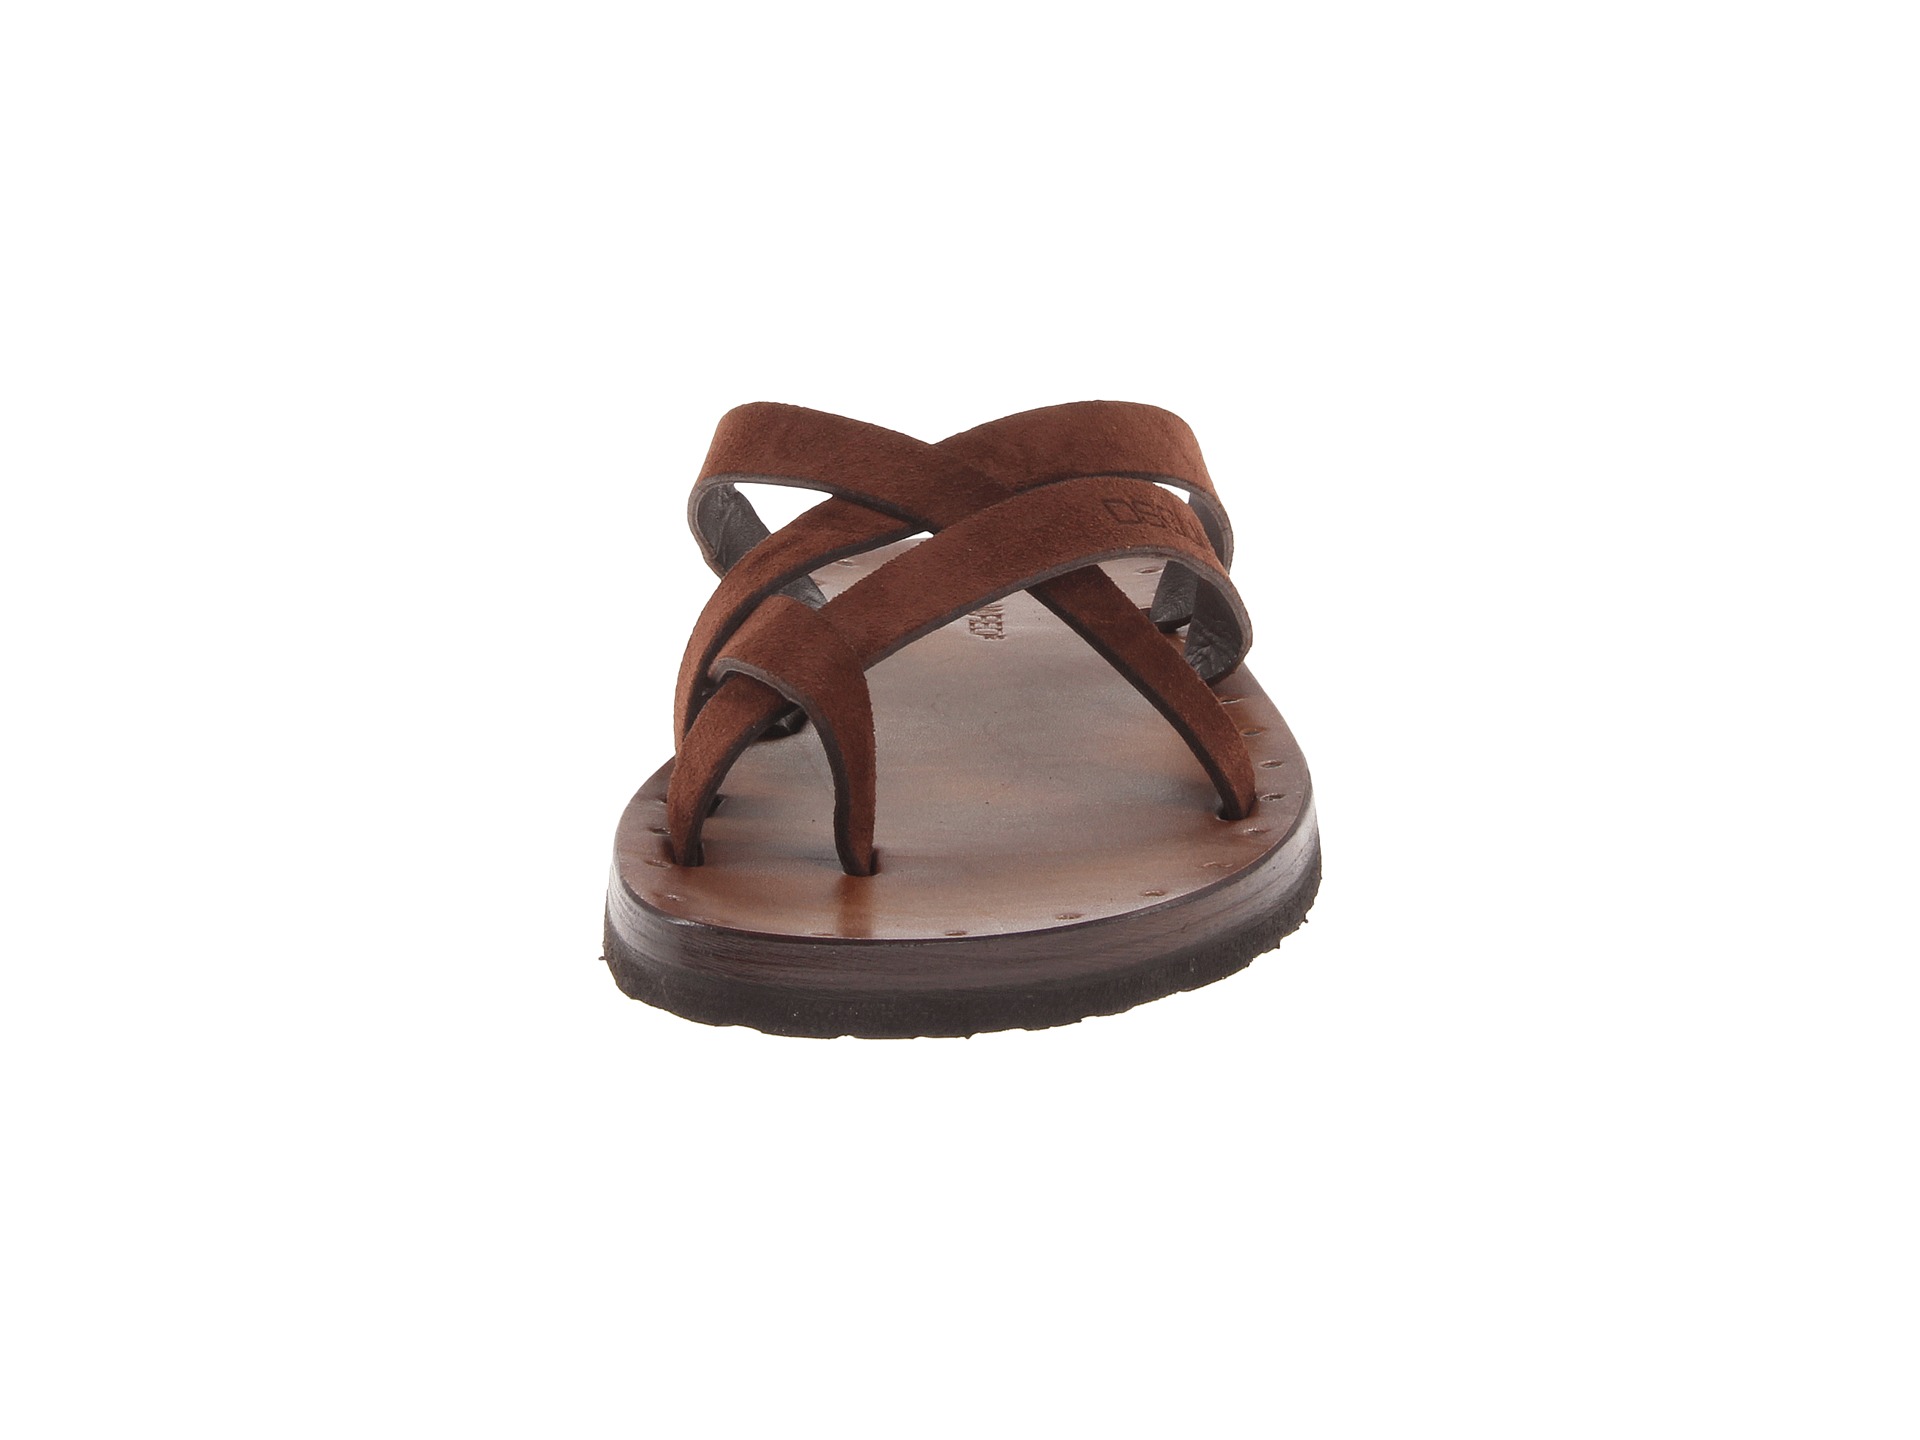 ... Jesus On The Beach Toe Ring Sandal Marrone | Shipped Free at Zappos